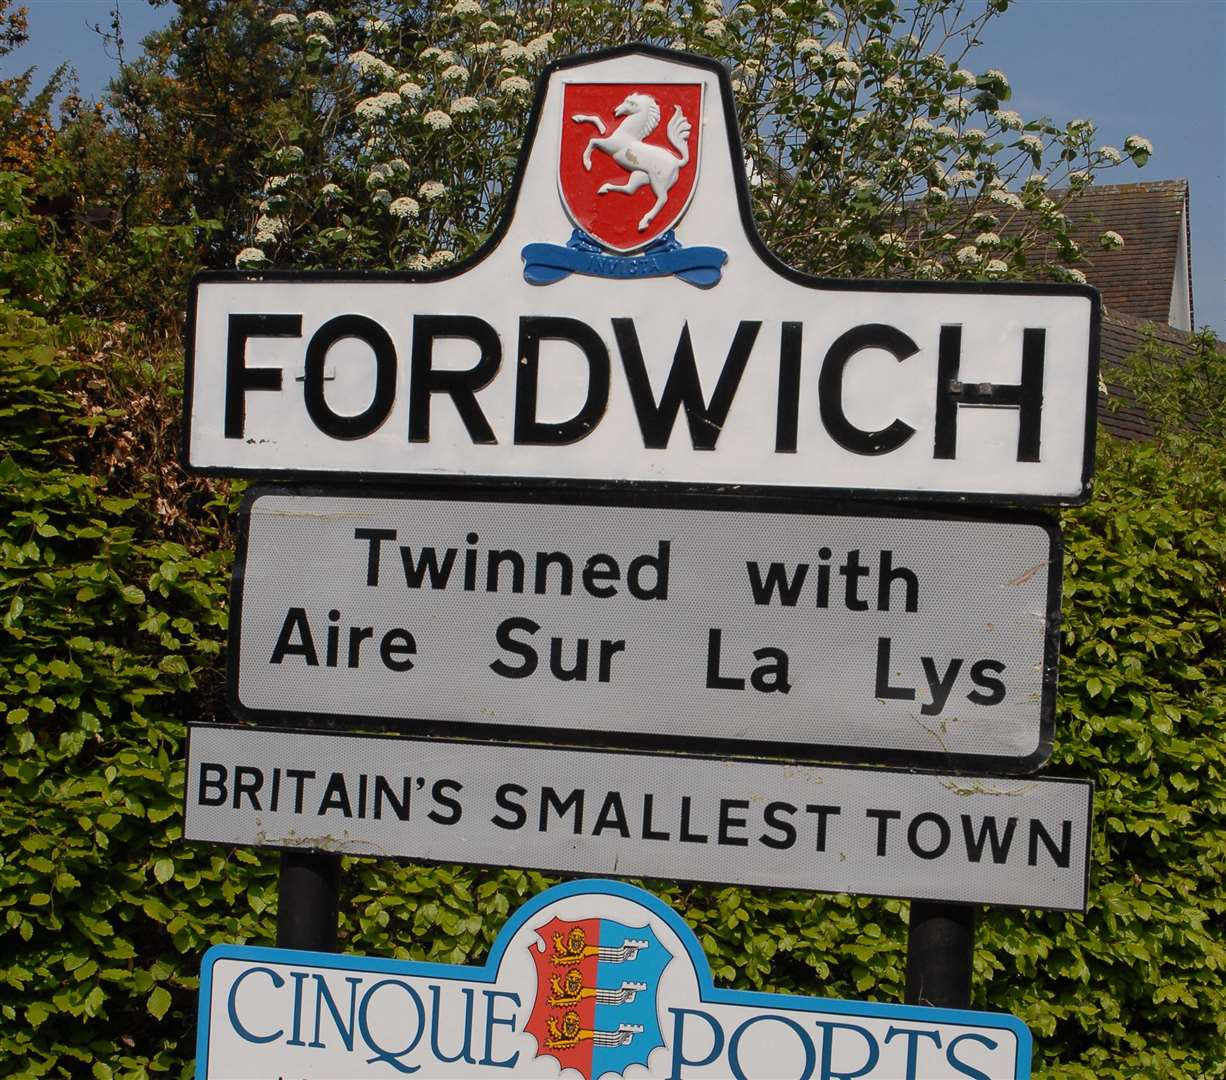 The girl was targeted in Fordwich – Britain’s smallest town